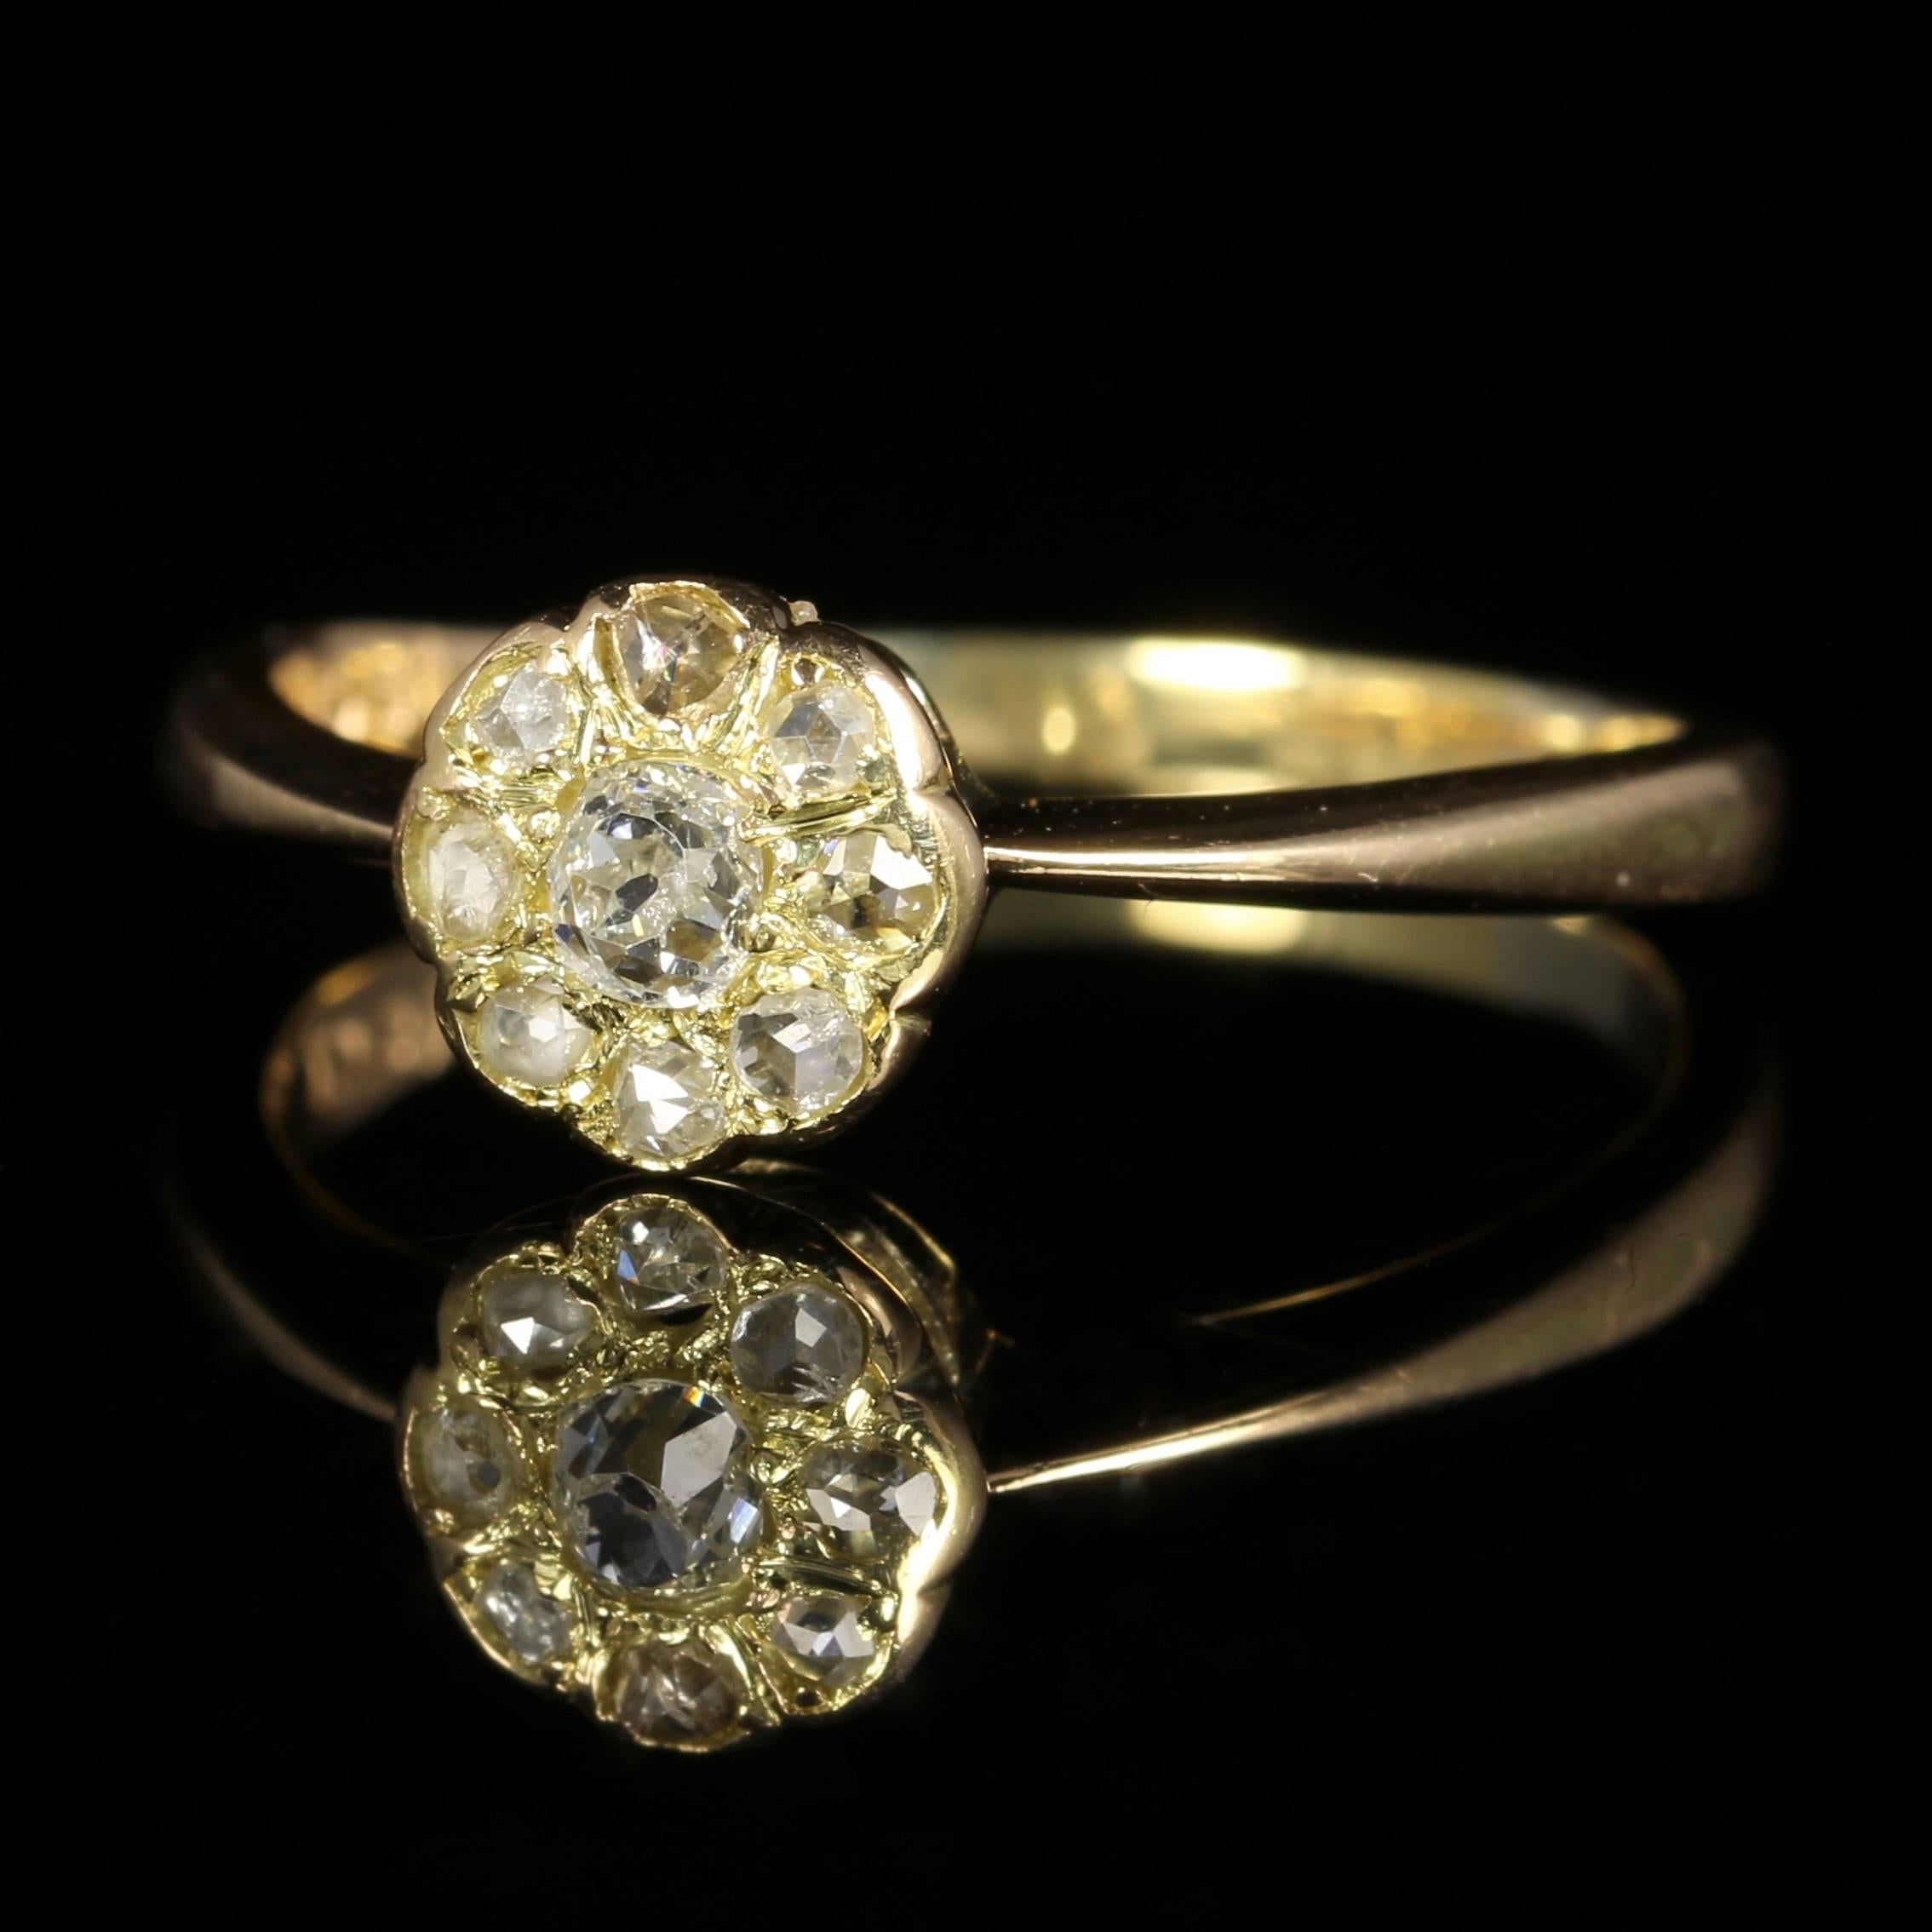 For more details please click continue reading down below...

This fabulous antique Victorian old cushion cut Diamond cluster ring is Circa 1880.

Set in 18ct Yellow Gold all round.

The centre old cushion cut Diamond is 0.15ct surrounded by a halo